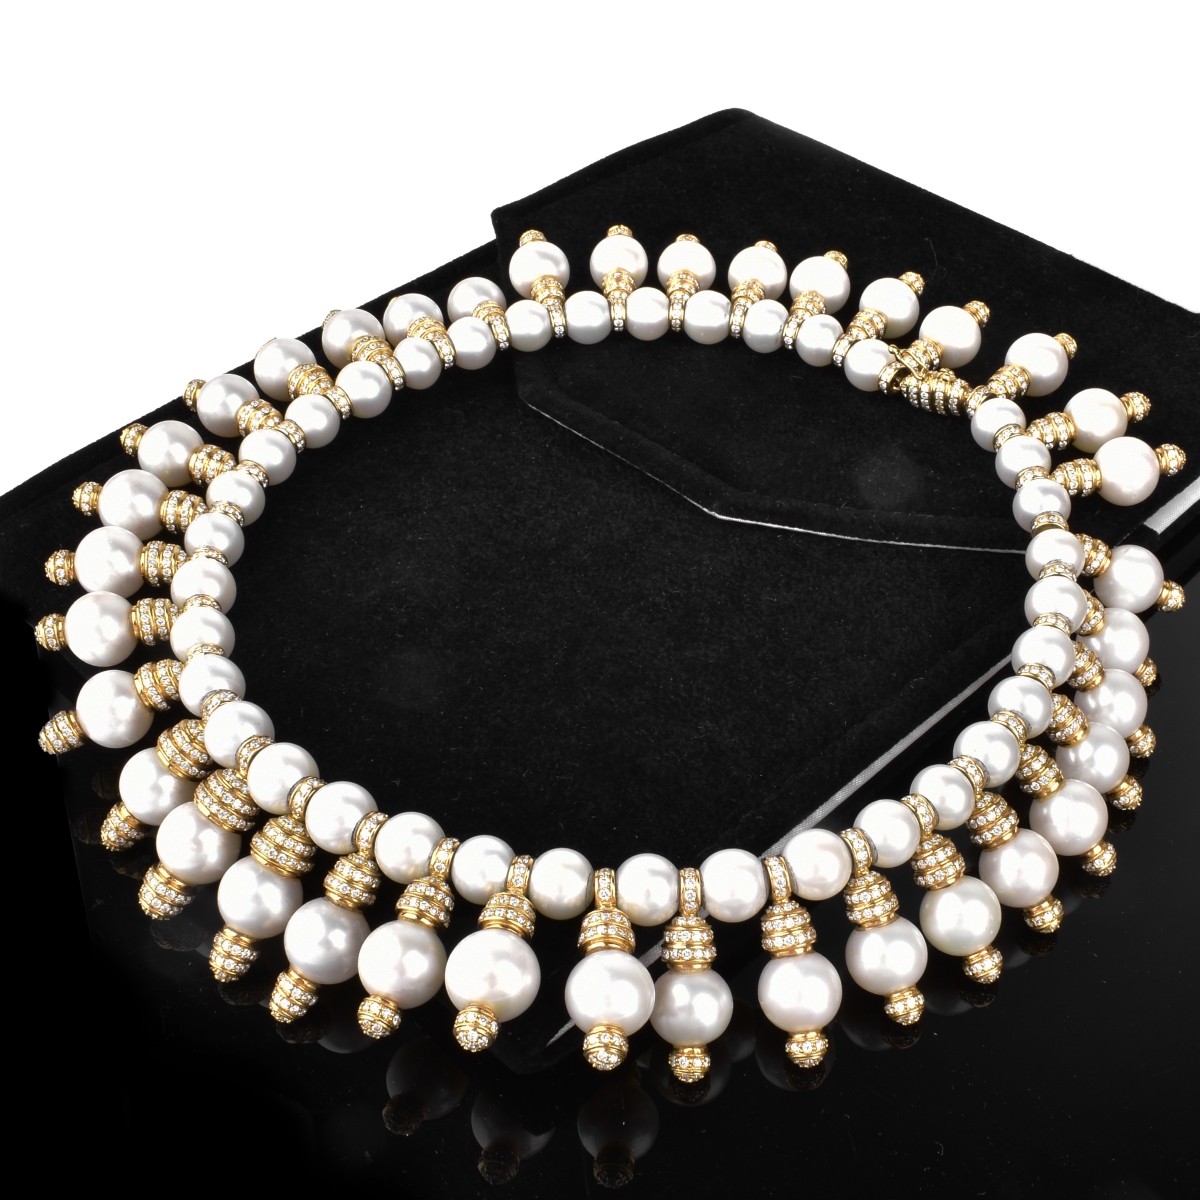 25.0ct TW Diamond, Pearl and 18K Gold Necklace